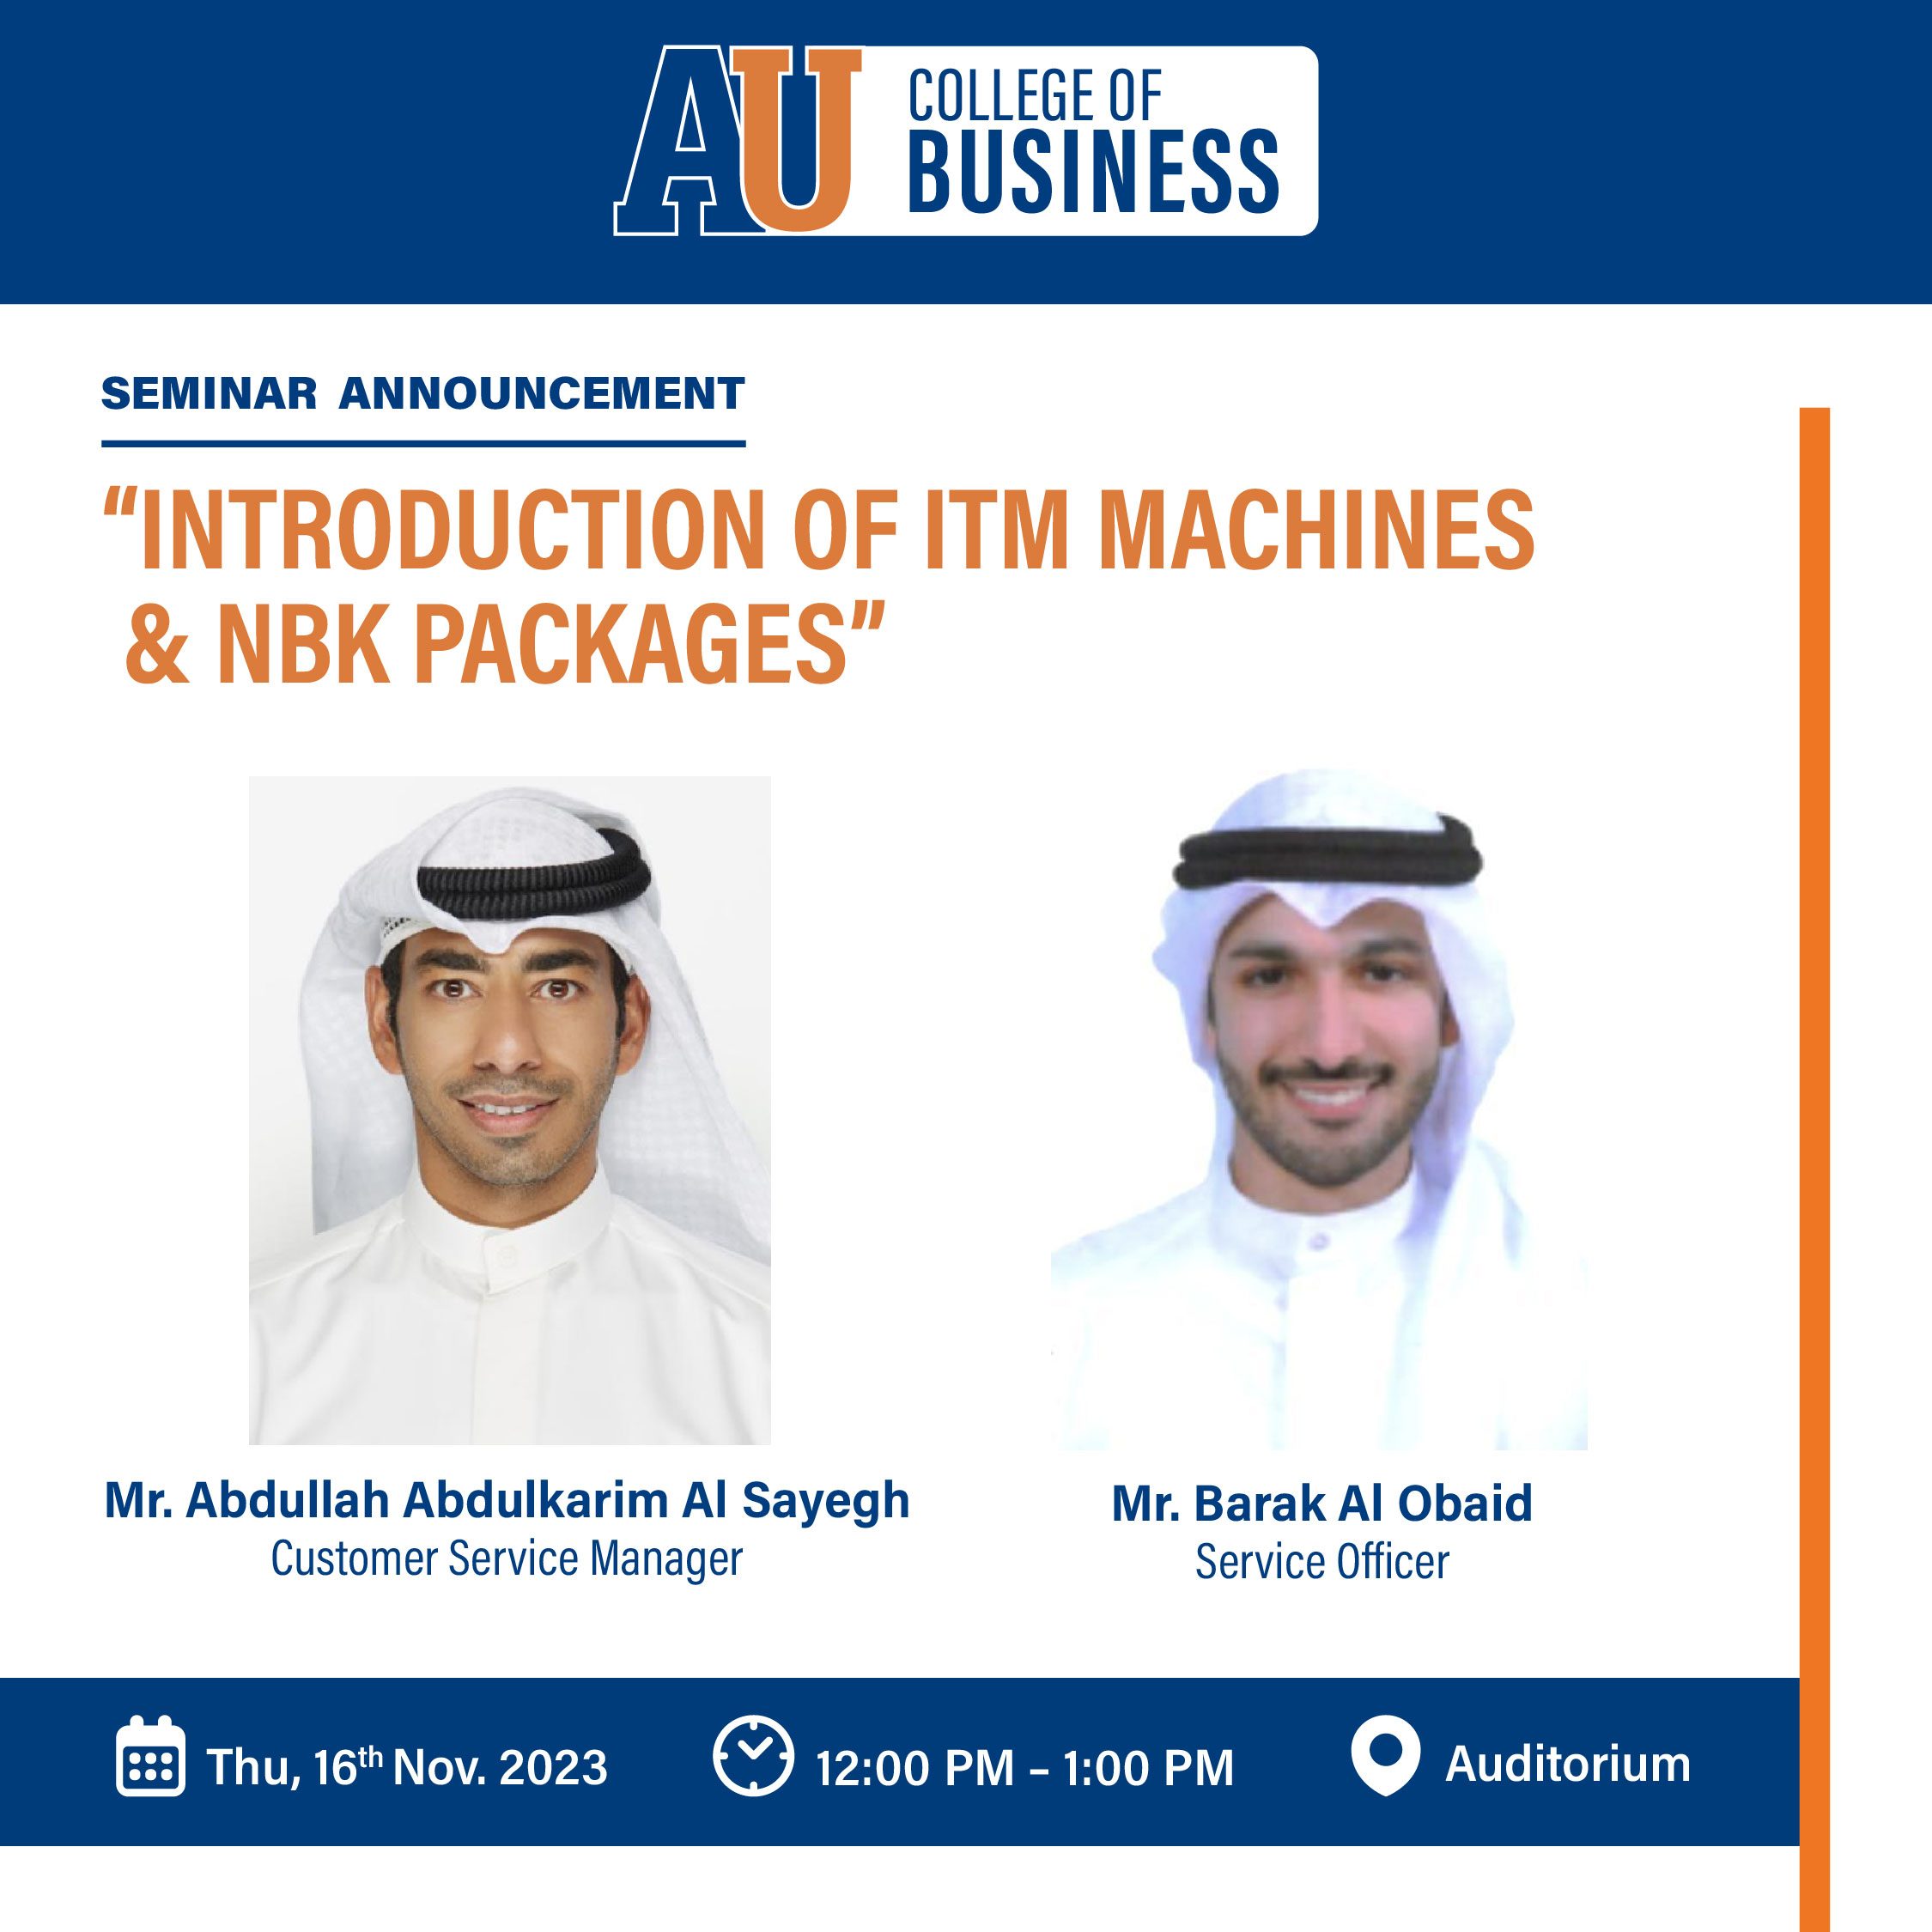 INTRODUCTION OF ITM MACHINES & NBK PACKAGES